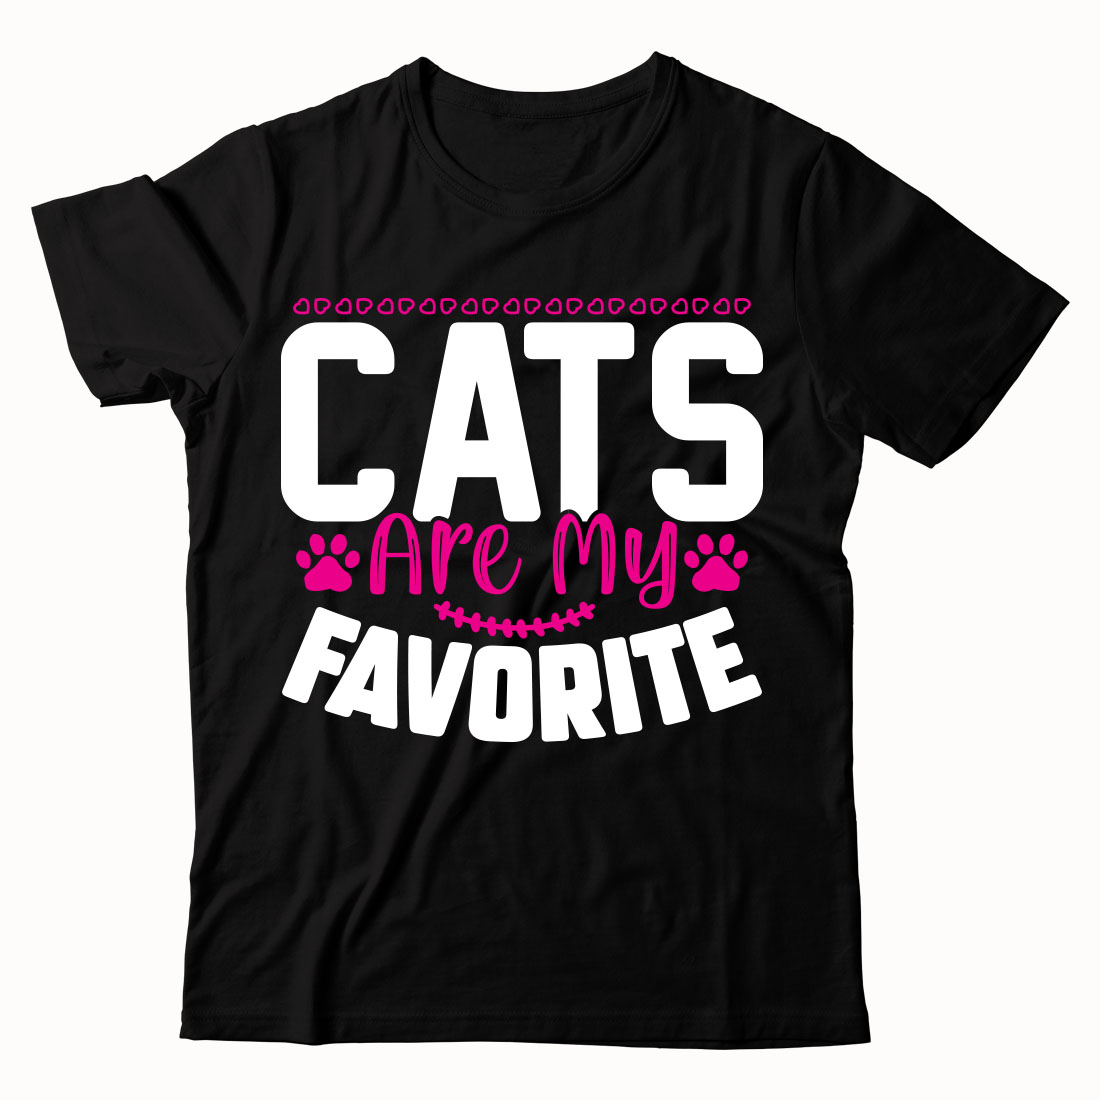 Black shirt that says cats are my favorite.